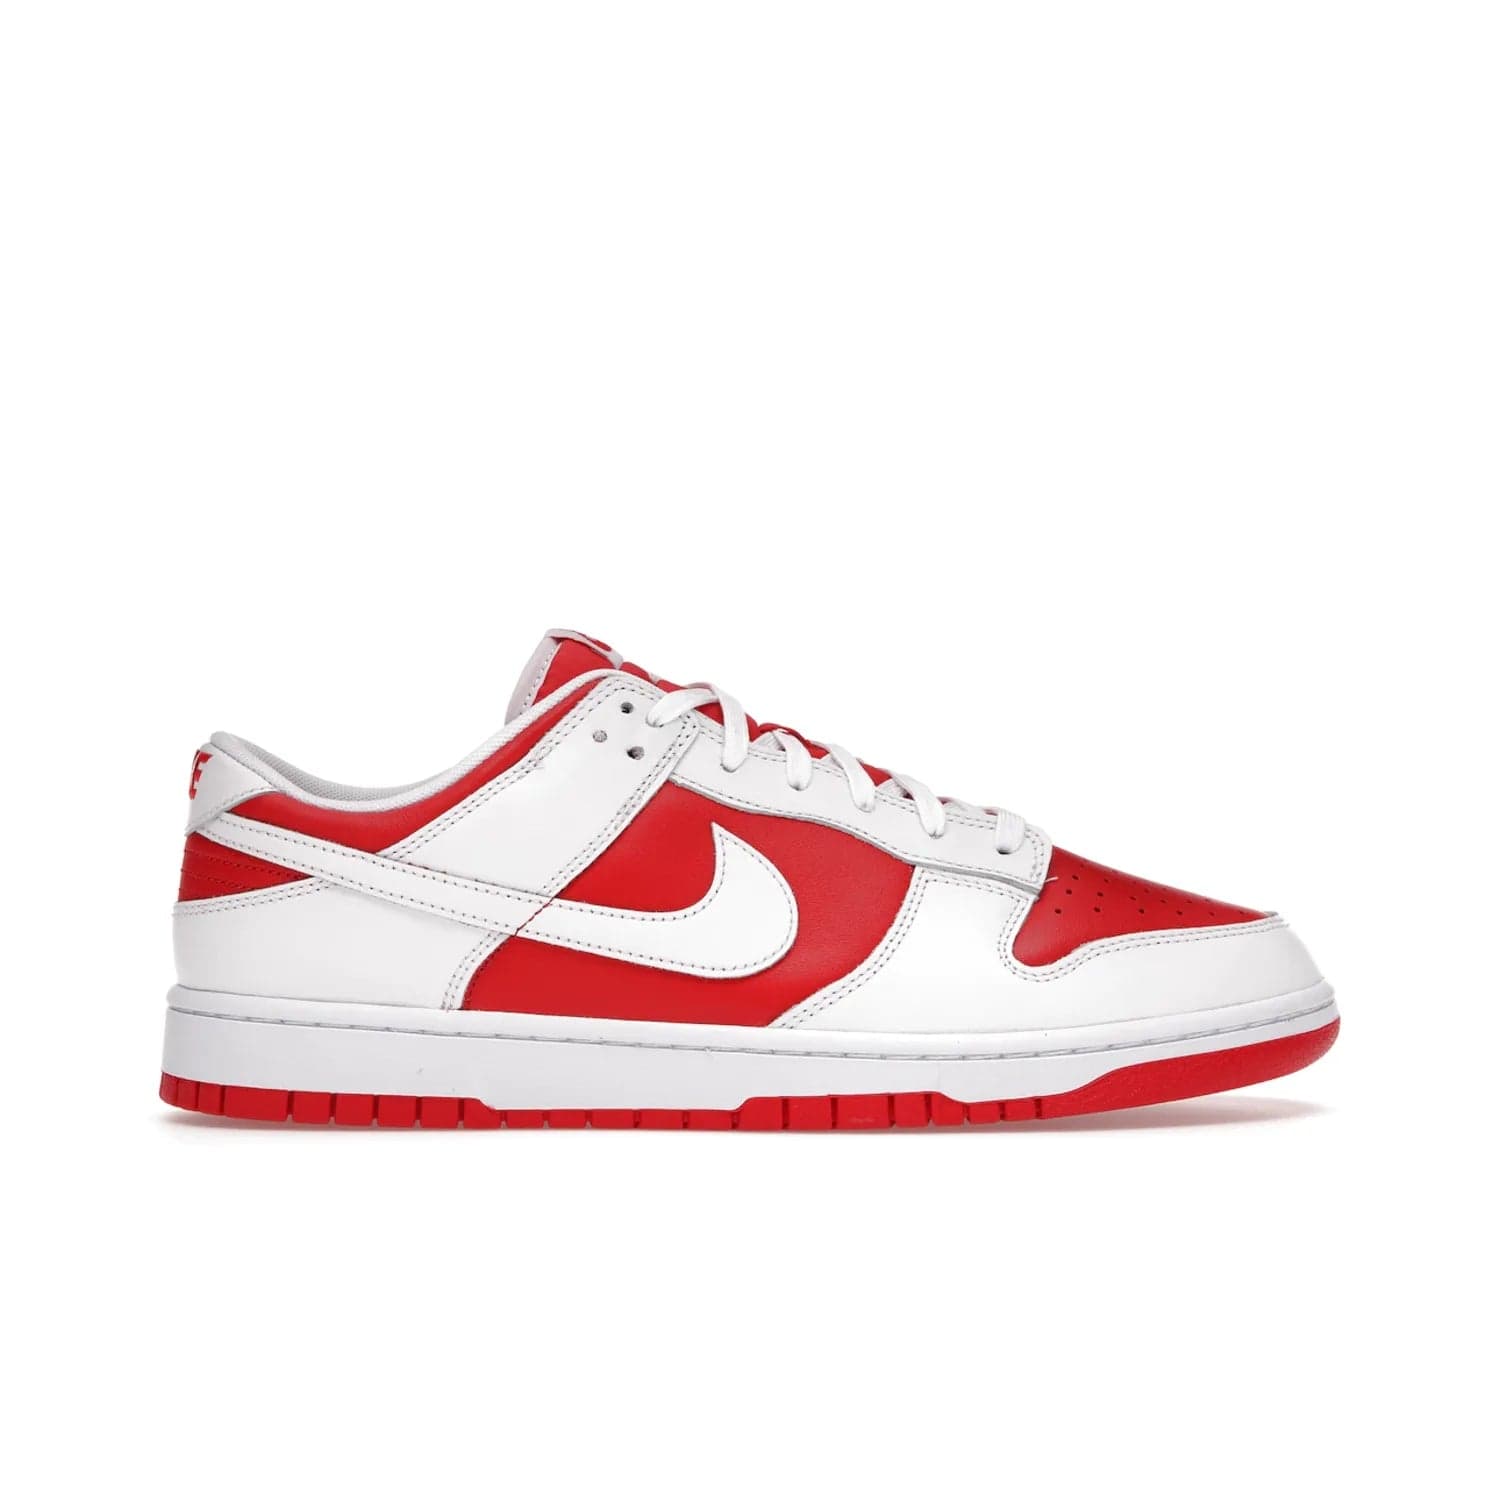 Nike Dunk Low Championship Red (2021) - Image 1 - Only at www.BallersClubKickz.com - A bold and stylish Nike Dunk Low Championship Red from 2021 with a classic retro design. University Red upper, white leather overlays and Swooshes, and a woven tongue label. Make a statement with these sleek kicks!